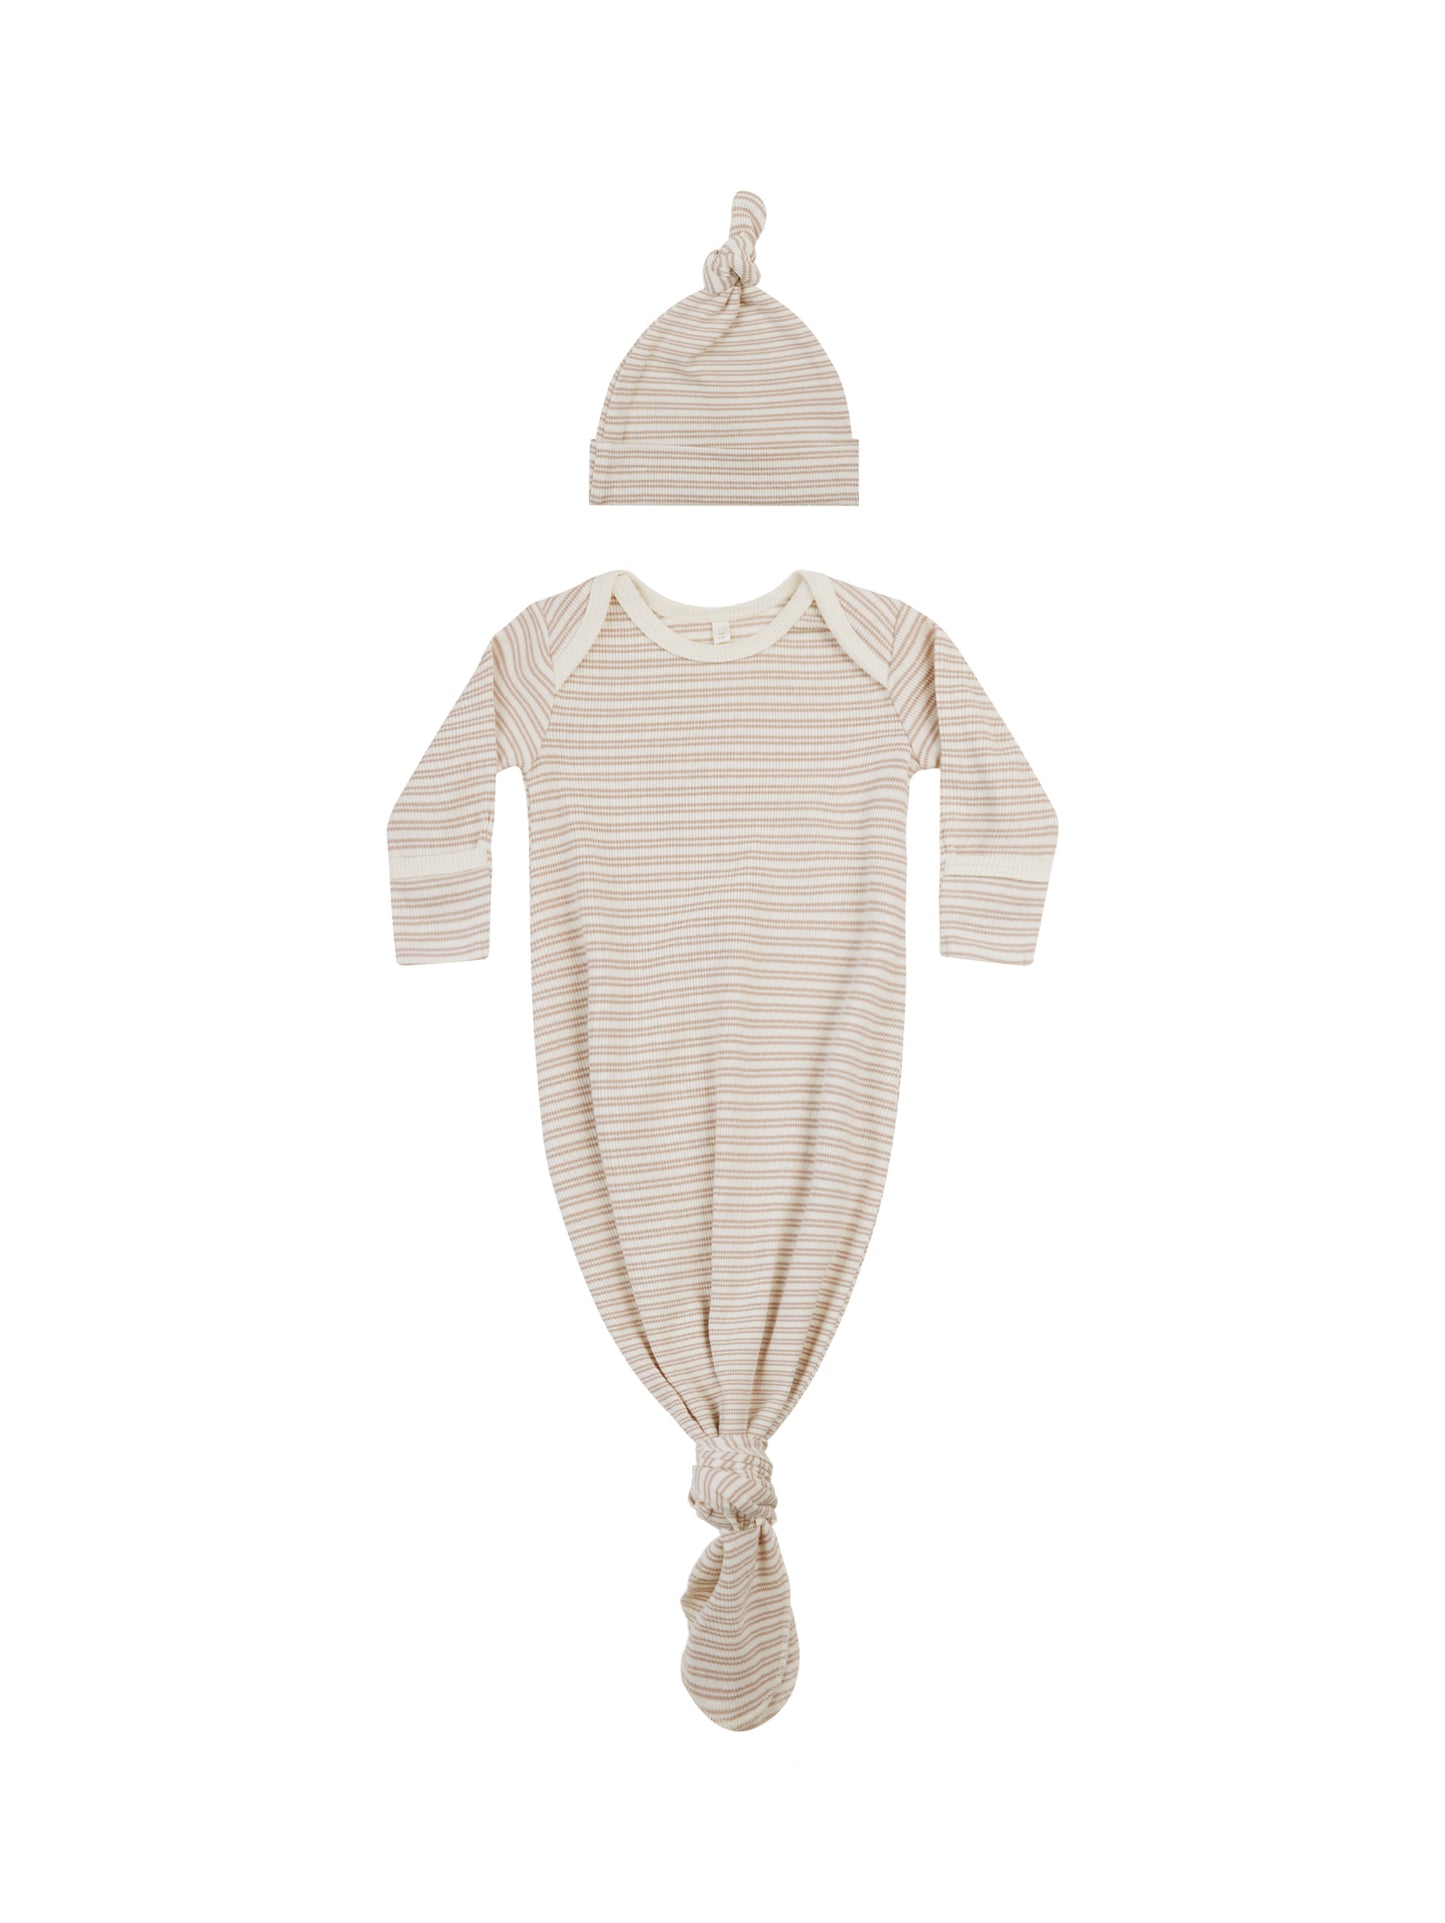 Quincy Mae - Knotted Baby Gown + Hat Set - Oat Stripe